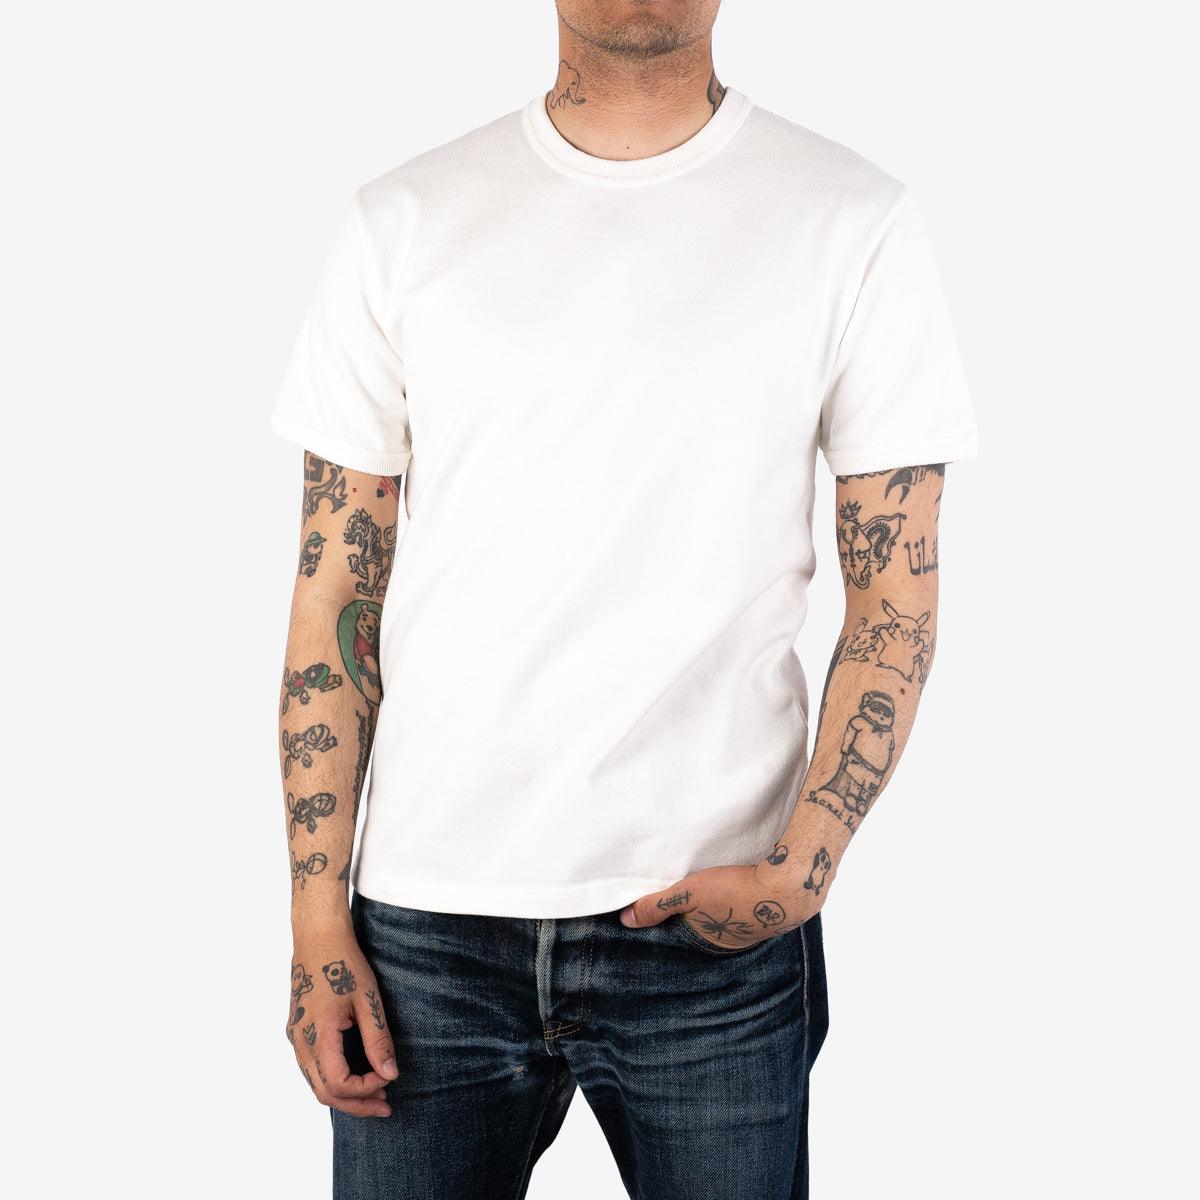 Image showing the IHT-1600-WHT - 11oz Crew Neck T-Shirt White which is a T-Shirts described by the following info Iron Heart, Released, T-Shirts, Tops and sold on the IRON HEART GERMANY online store